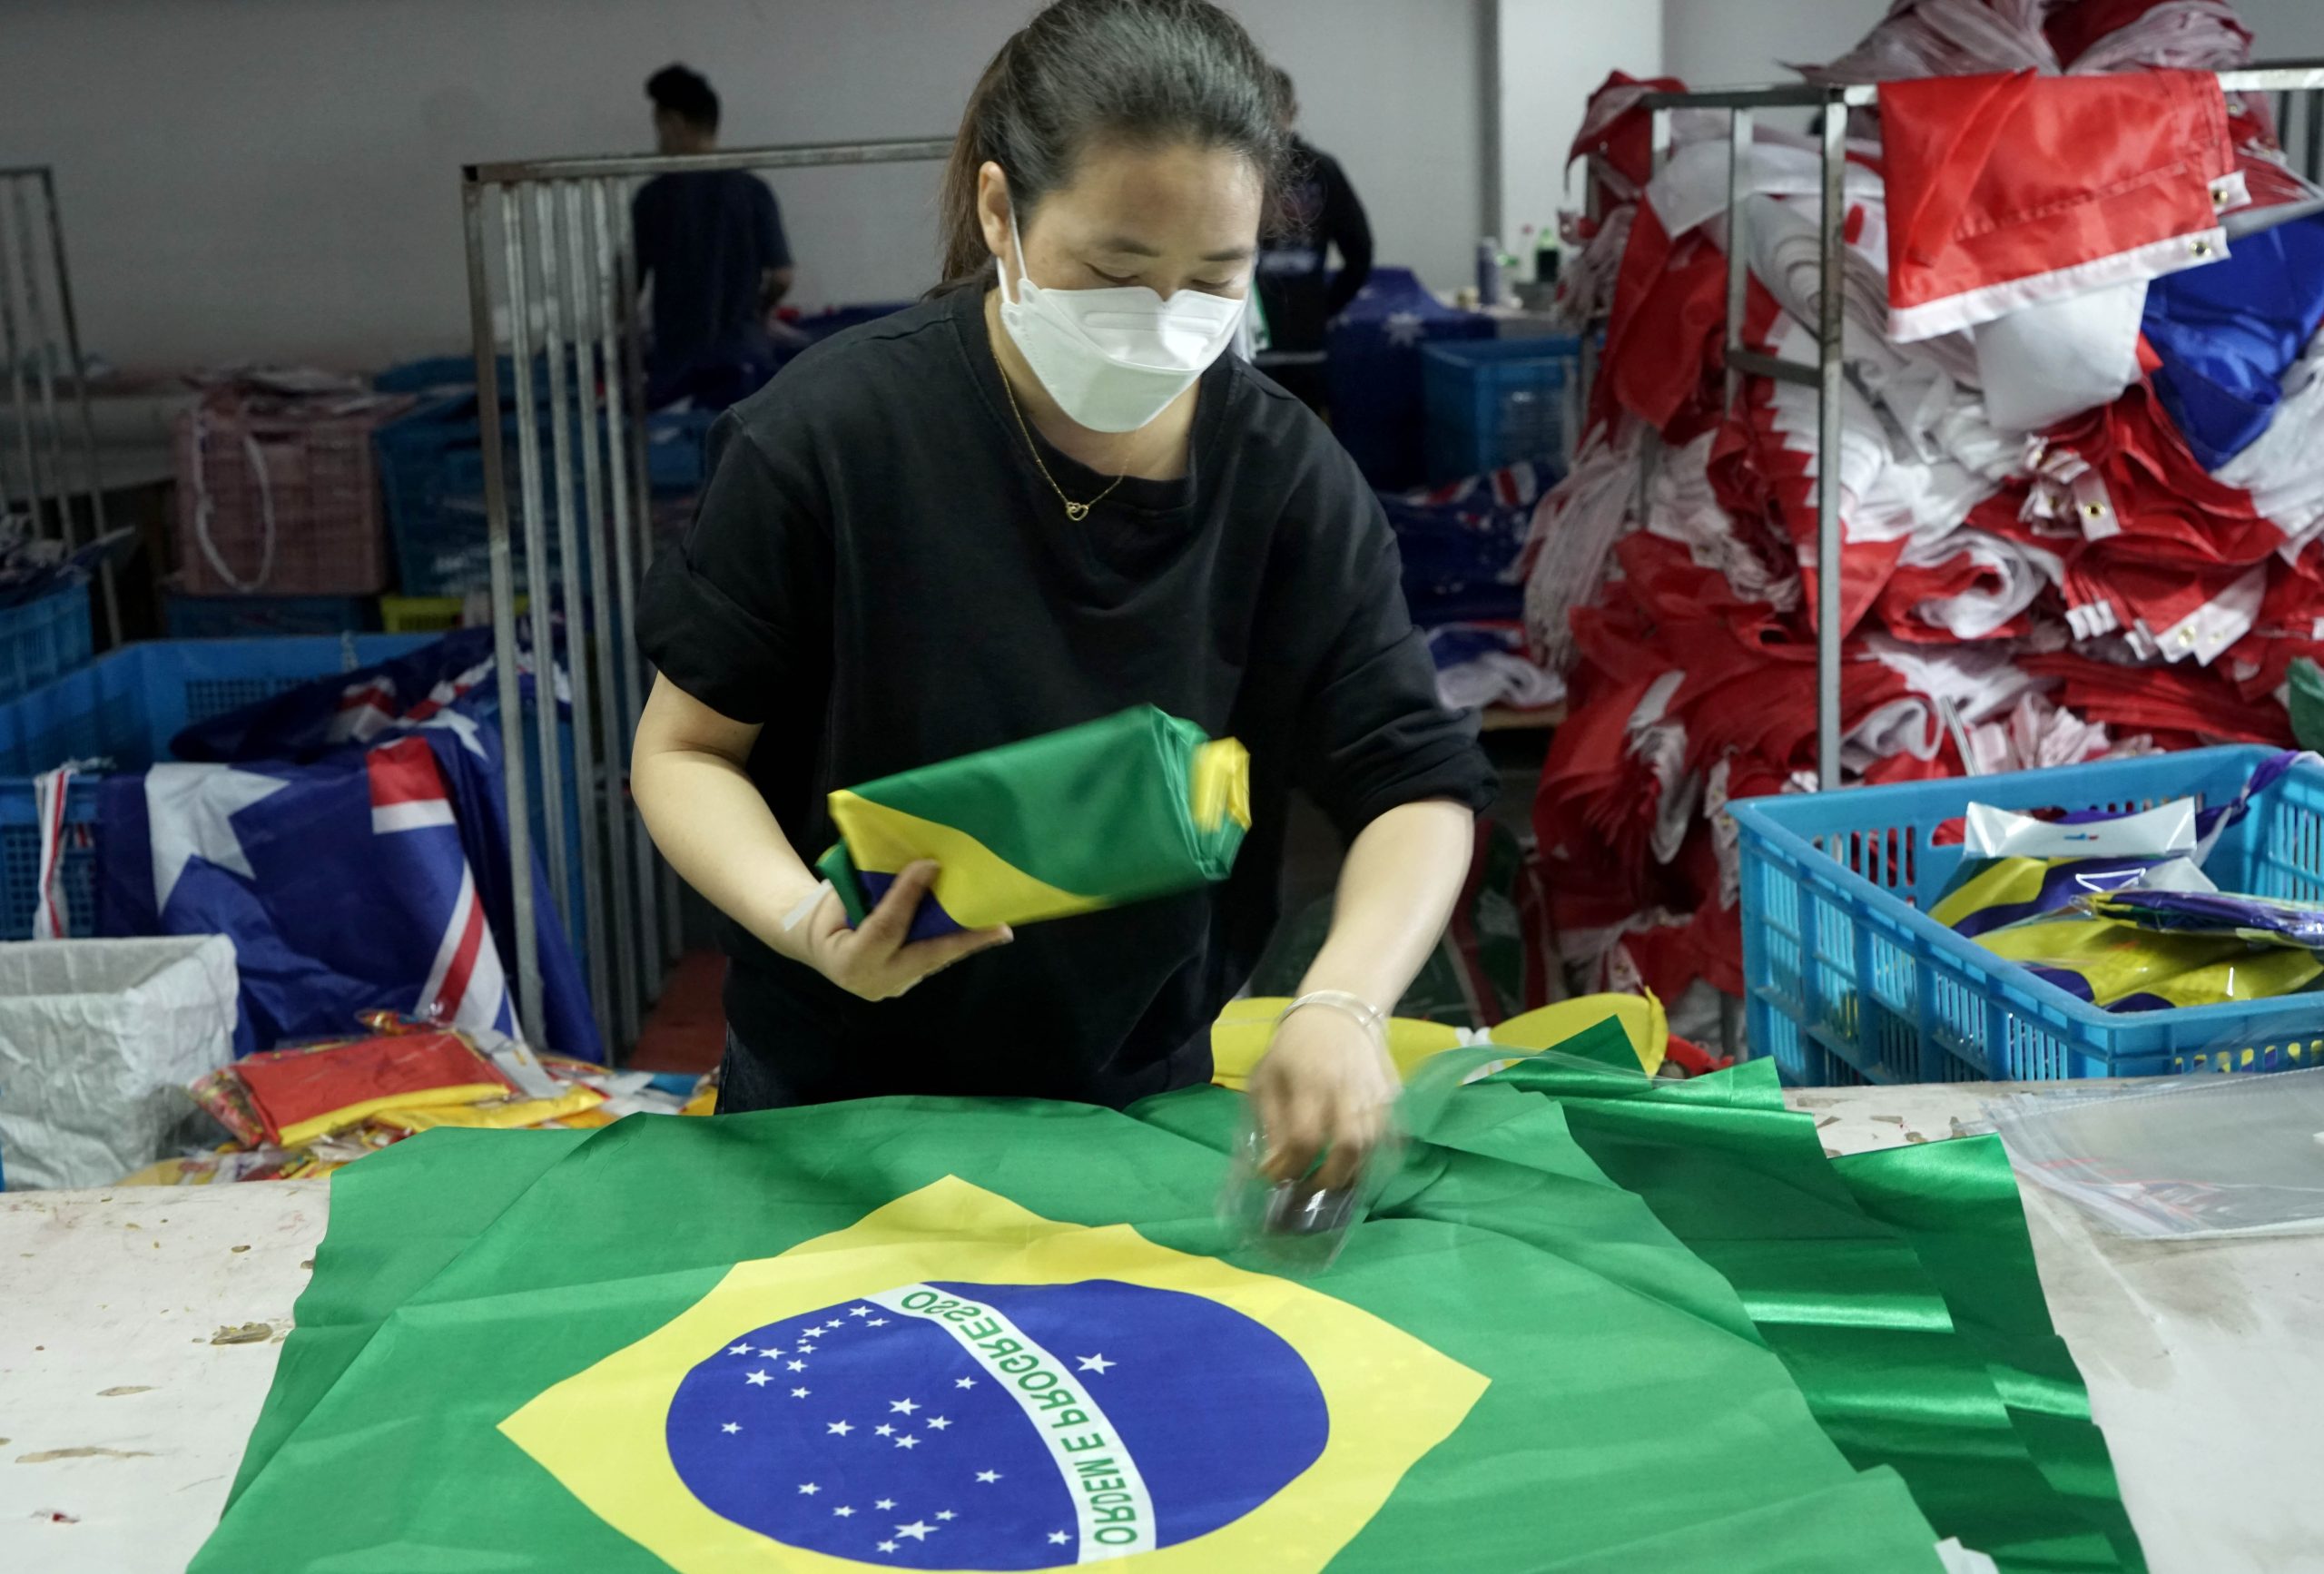 The 500 people who move Latin America's business and economy